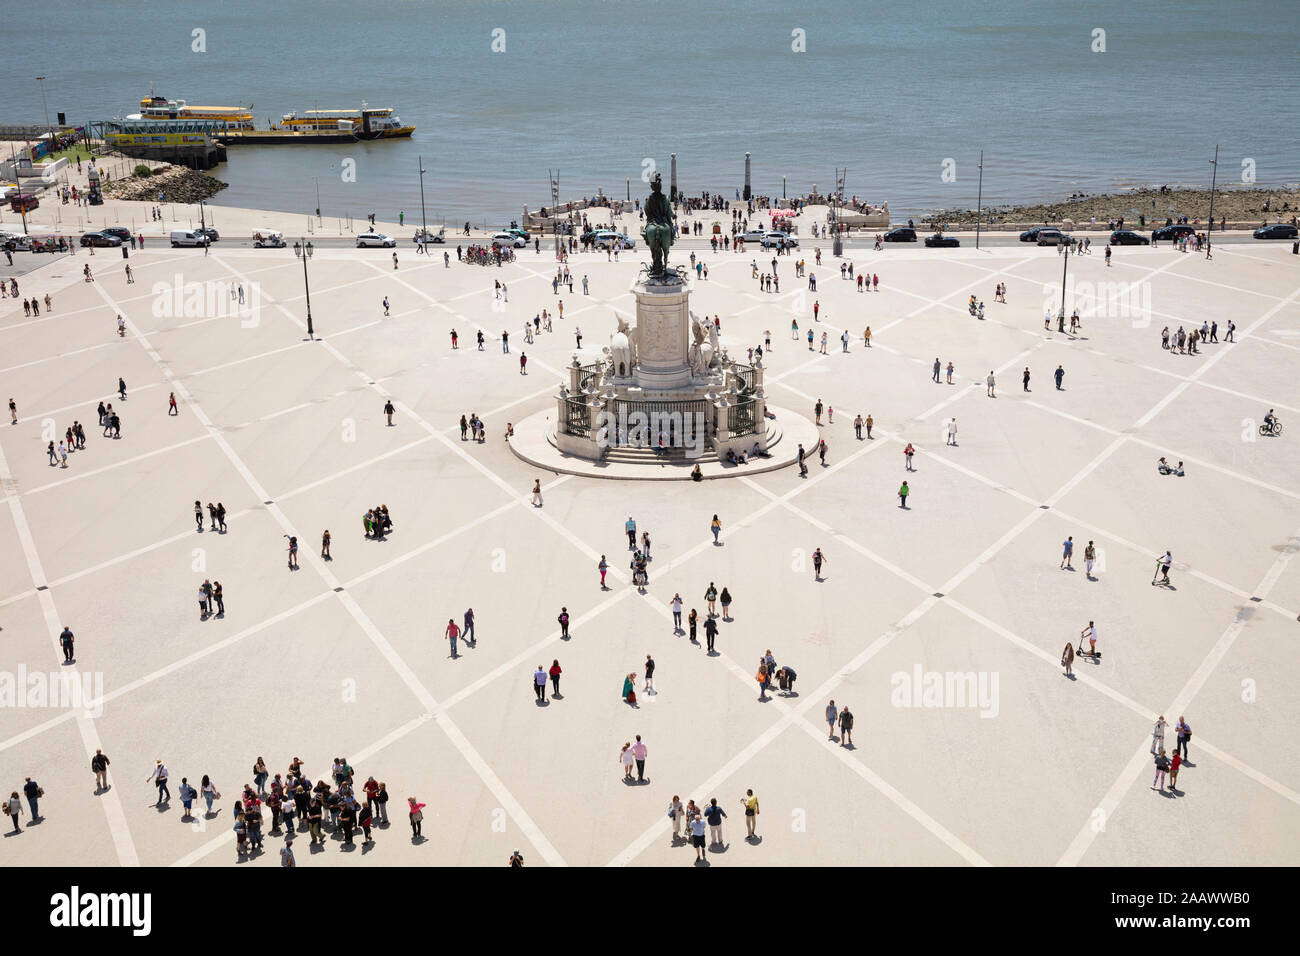 Aerial view of people at Praca do Comércio against sky, Lisbon, Portugal Stock Photo